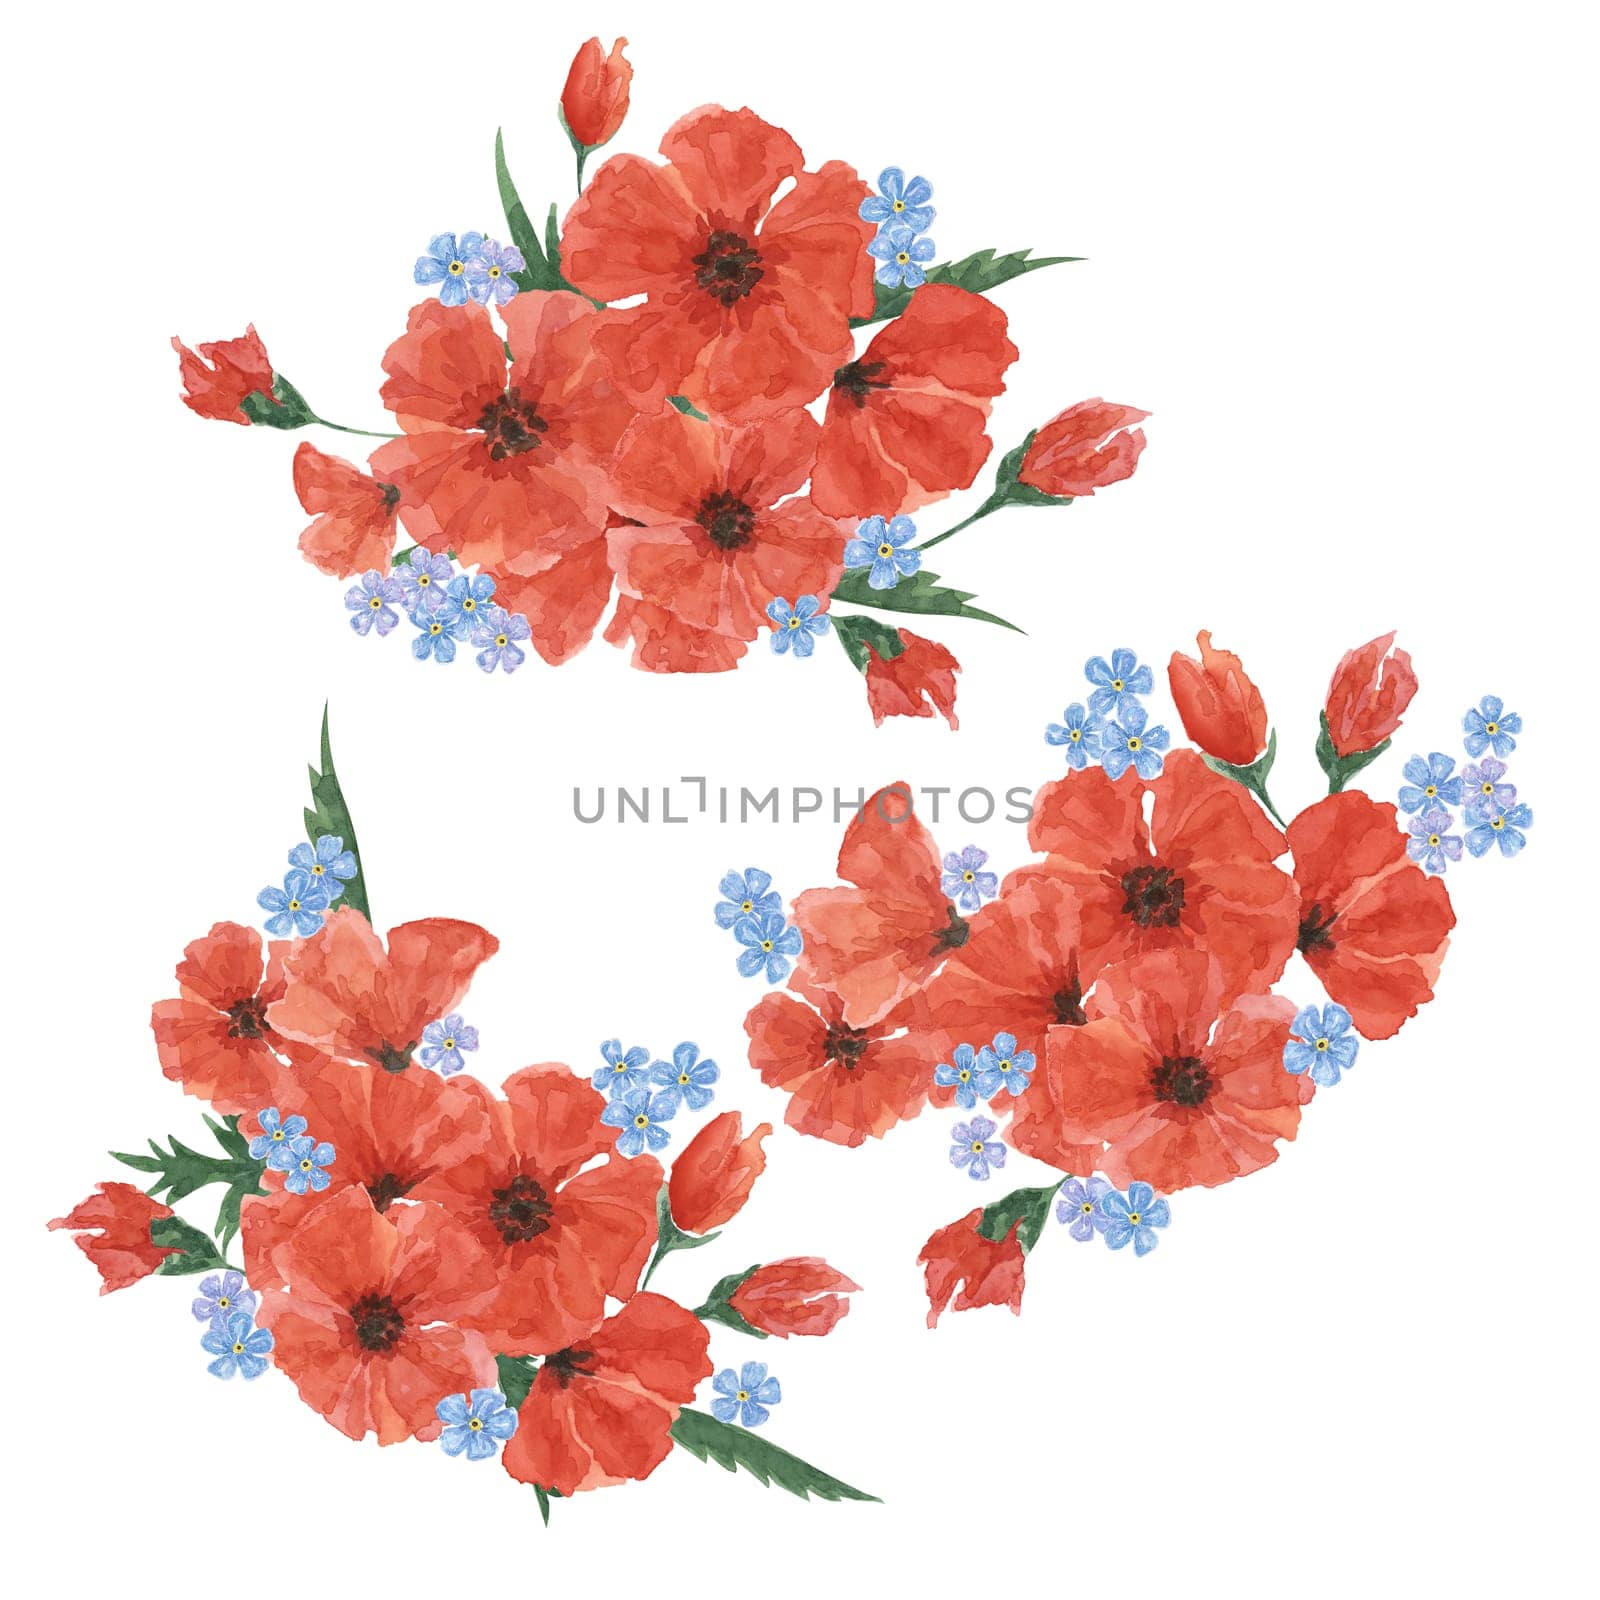 Red poppies and forget-me-nots bouquets. Poppy day compositions. Hand drawn watercolor illustration for card, banners, commemorative events, memorial by Fofito